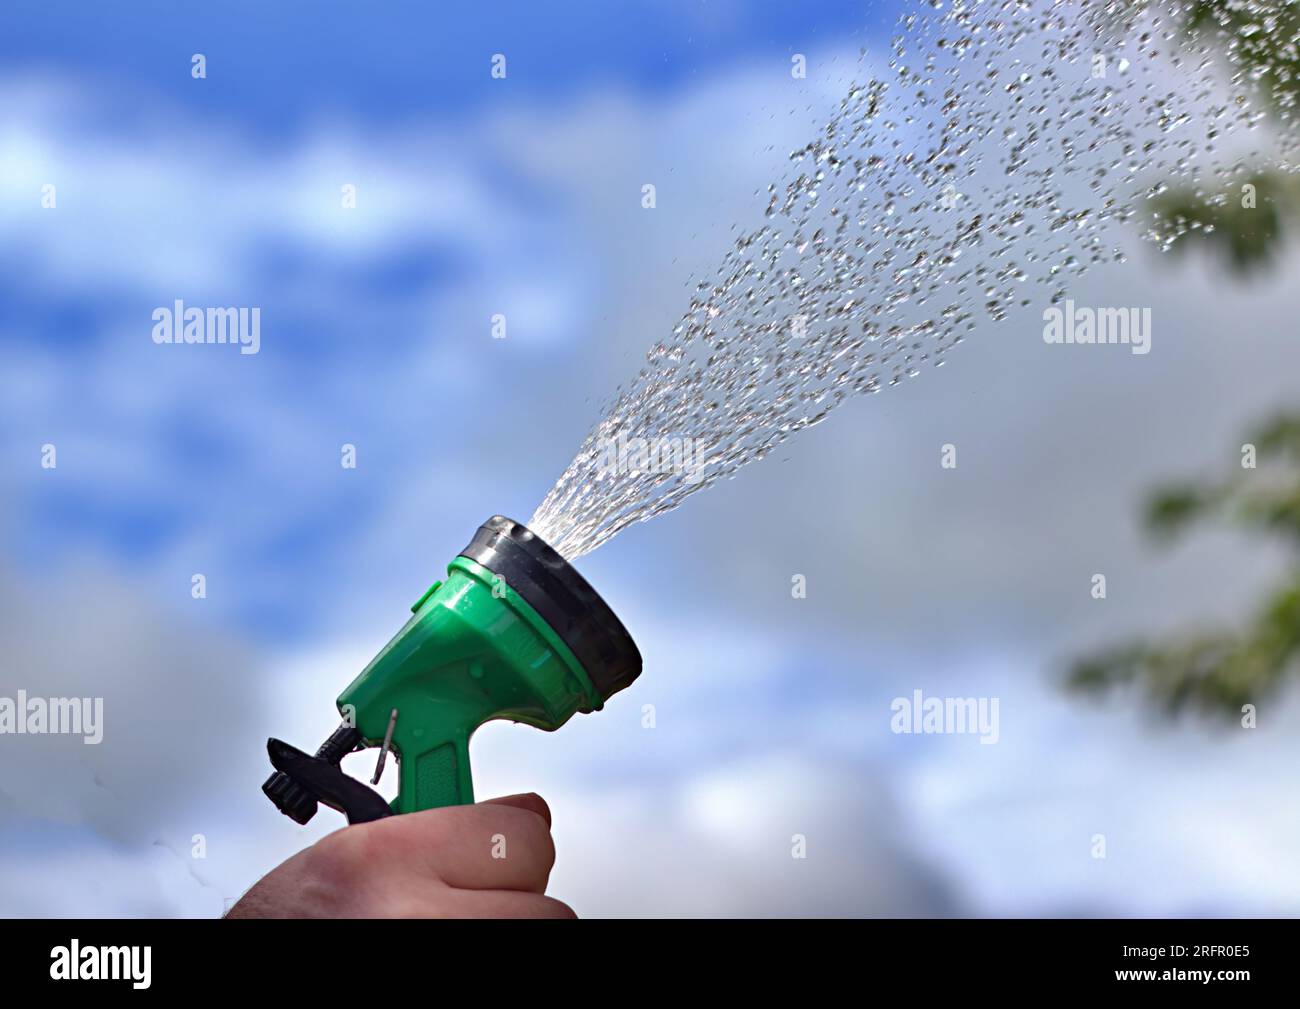 Hand using a hosepipe with sprayer to water plants Stock Photo